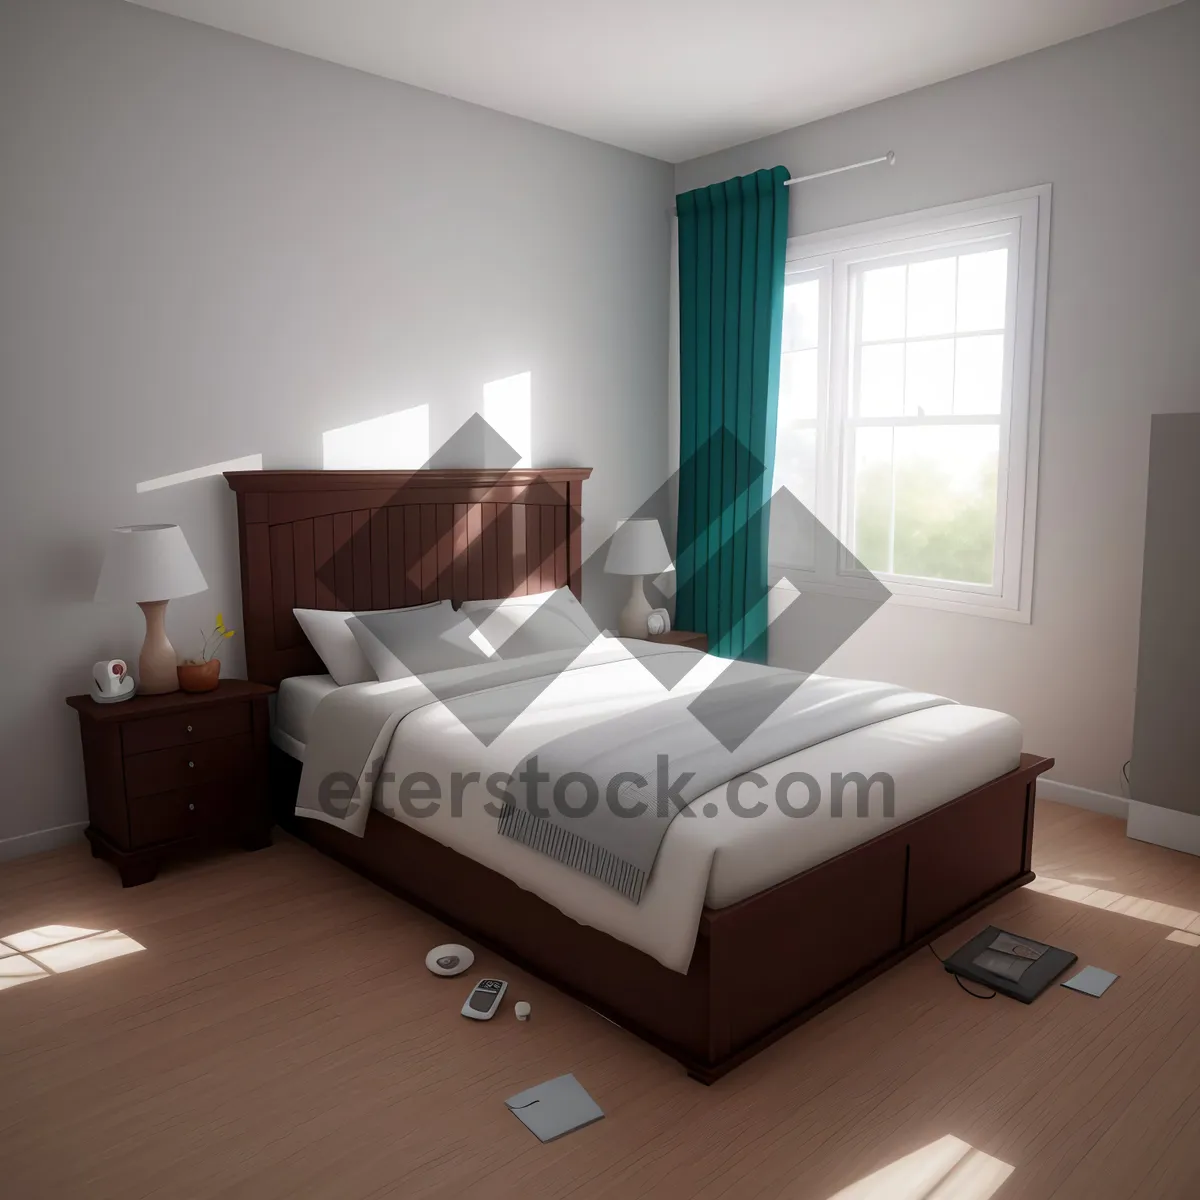 Picture of Modern Bedroom with Cozy Furniture and Stylish Lighting